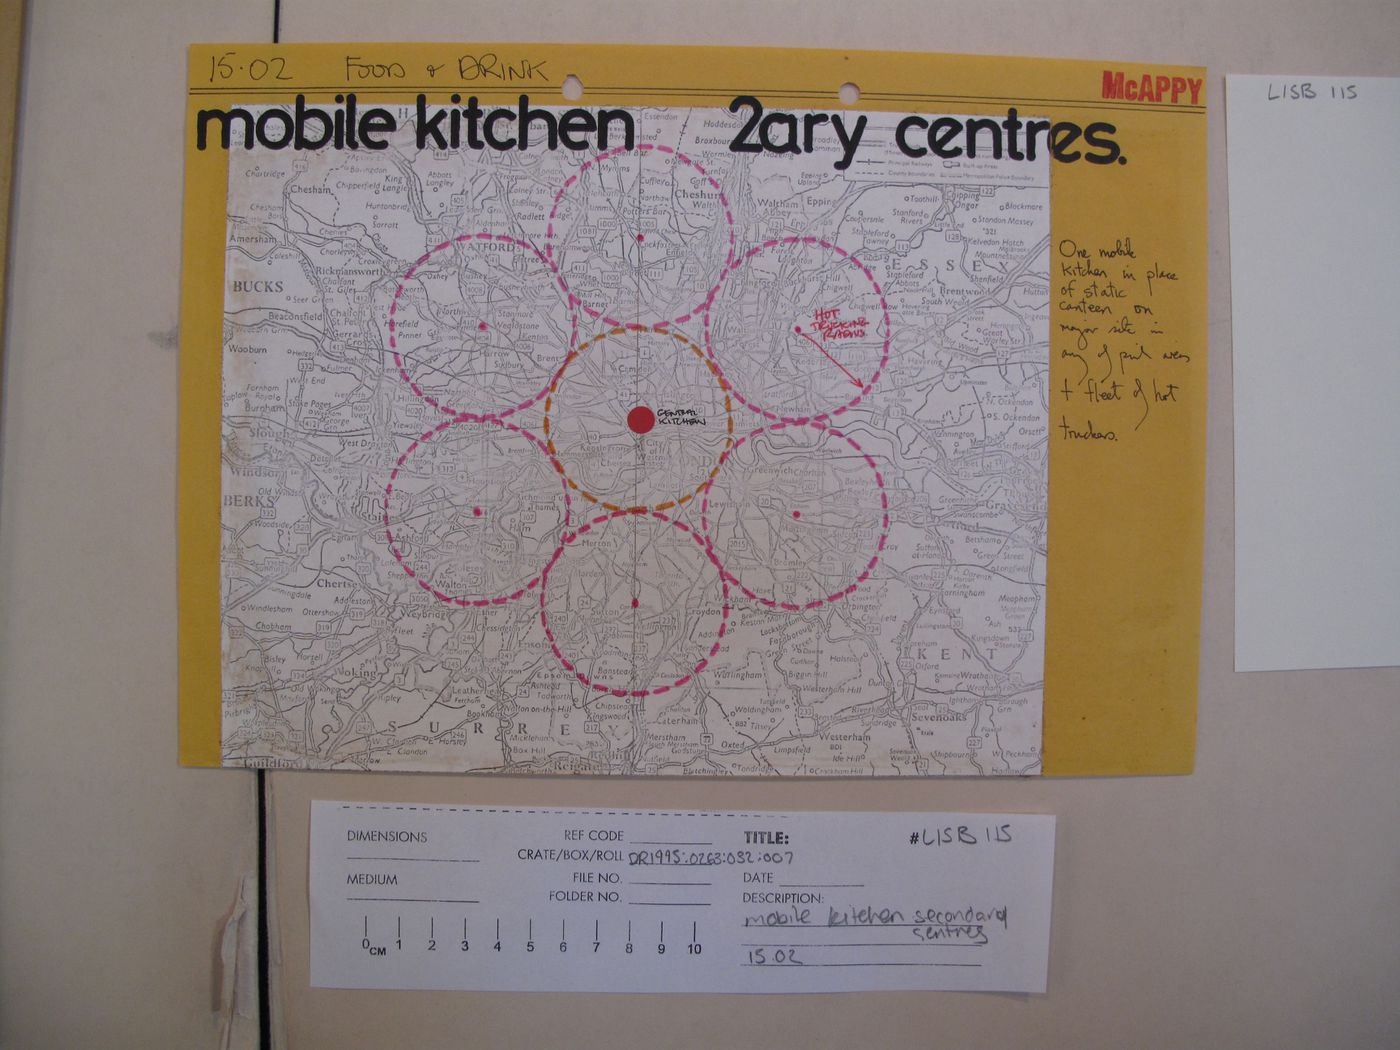 McAppy: map of London area showing mobile kitchen secondary centres